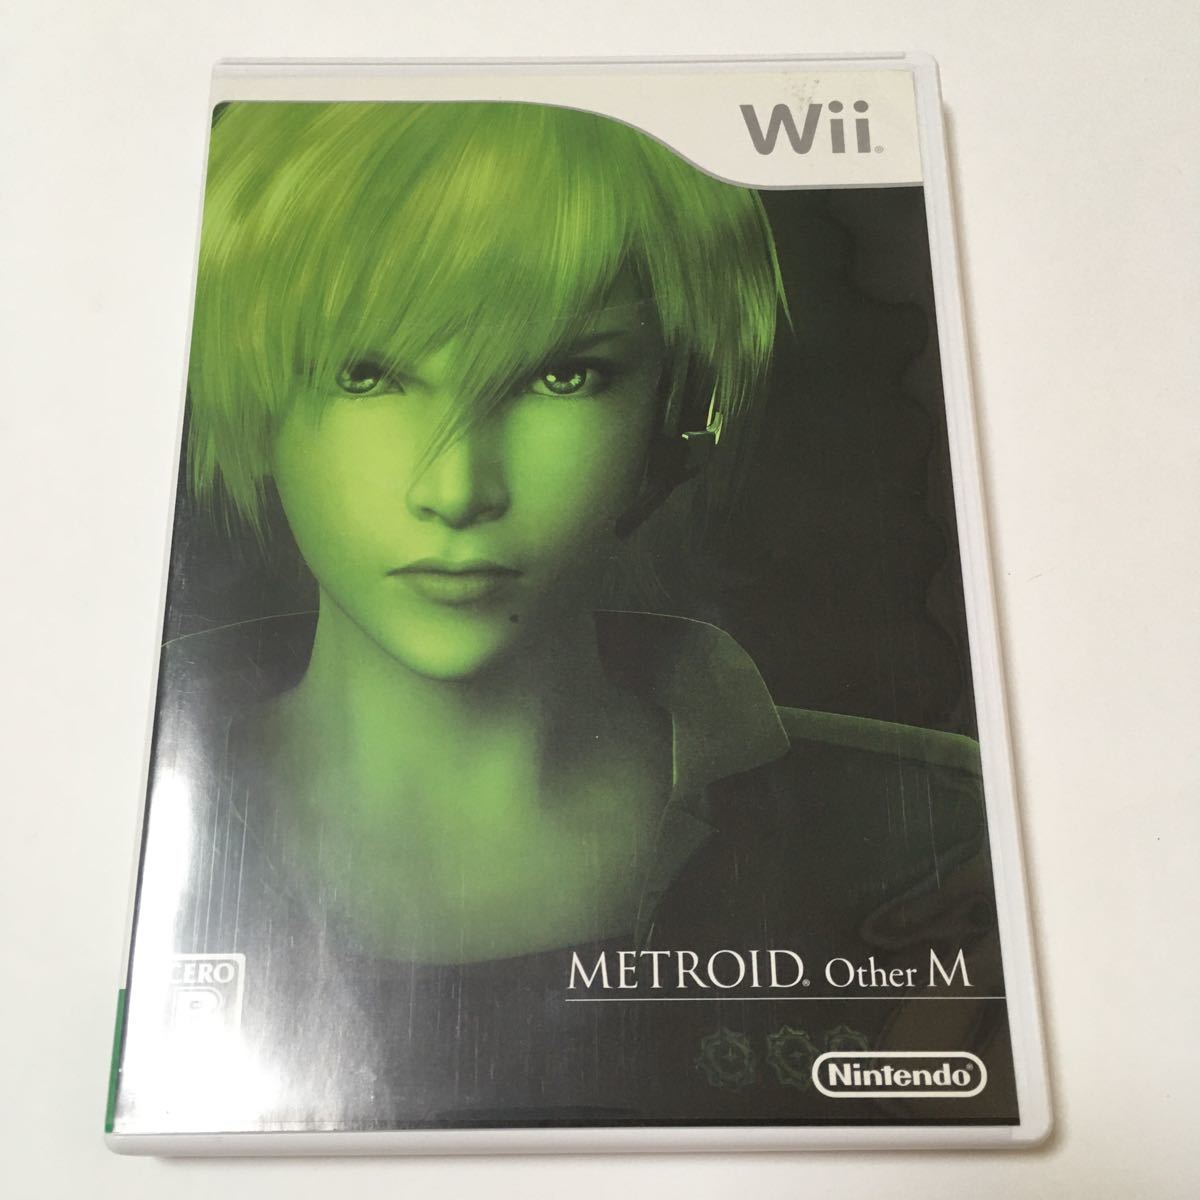 Wii ソフト メトロイドアザーエム METROID Other M サムス　任天堂　レトロ　ゲーム　レア　カセット　ファミコン